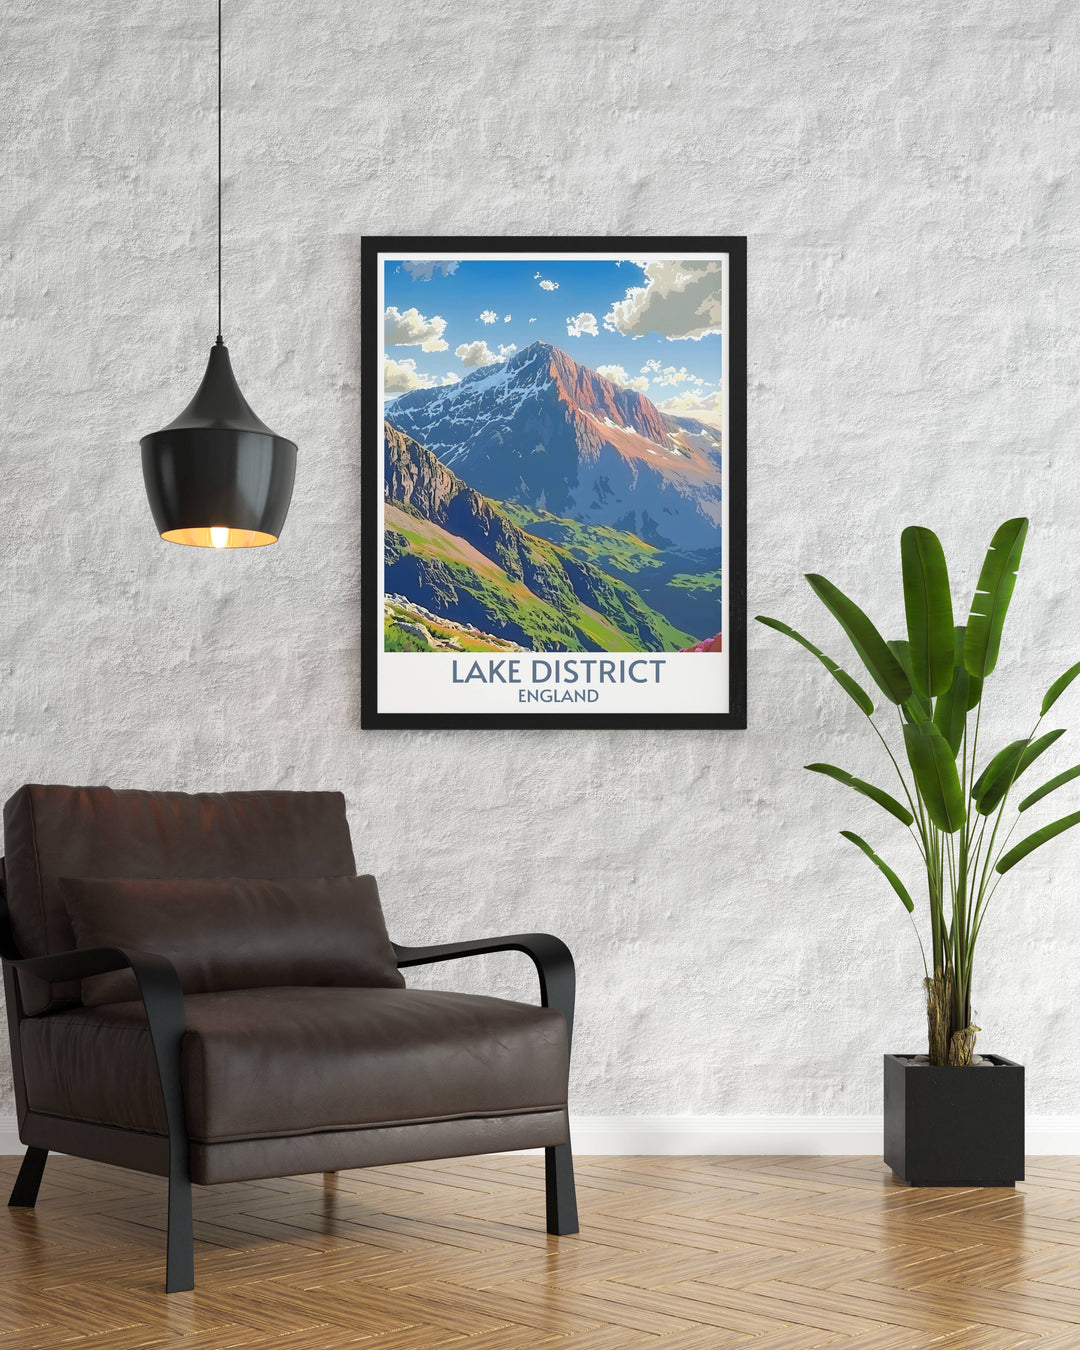 High quality Scafell Peak artwork perfect for enhancing Lake District decor. This captivating print captures the essence of the Lake Districts dramatic scenery and serene beauty, making it a thoughtful gift for travel and nature enthusiasts.